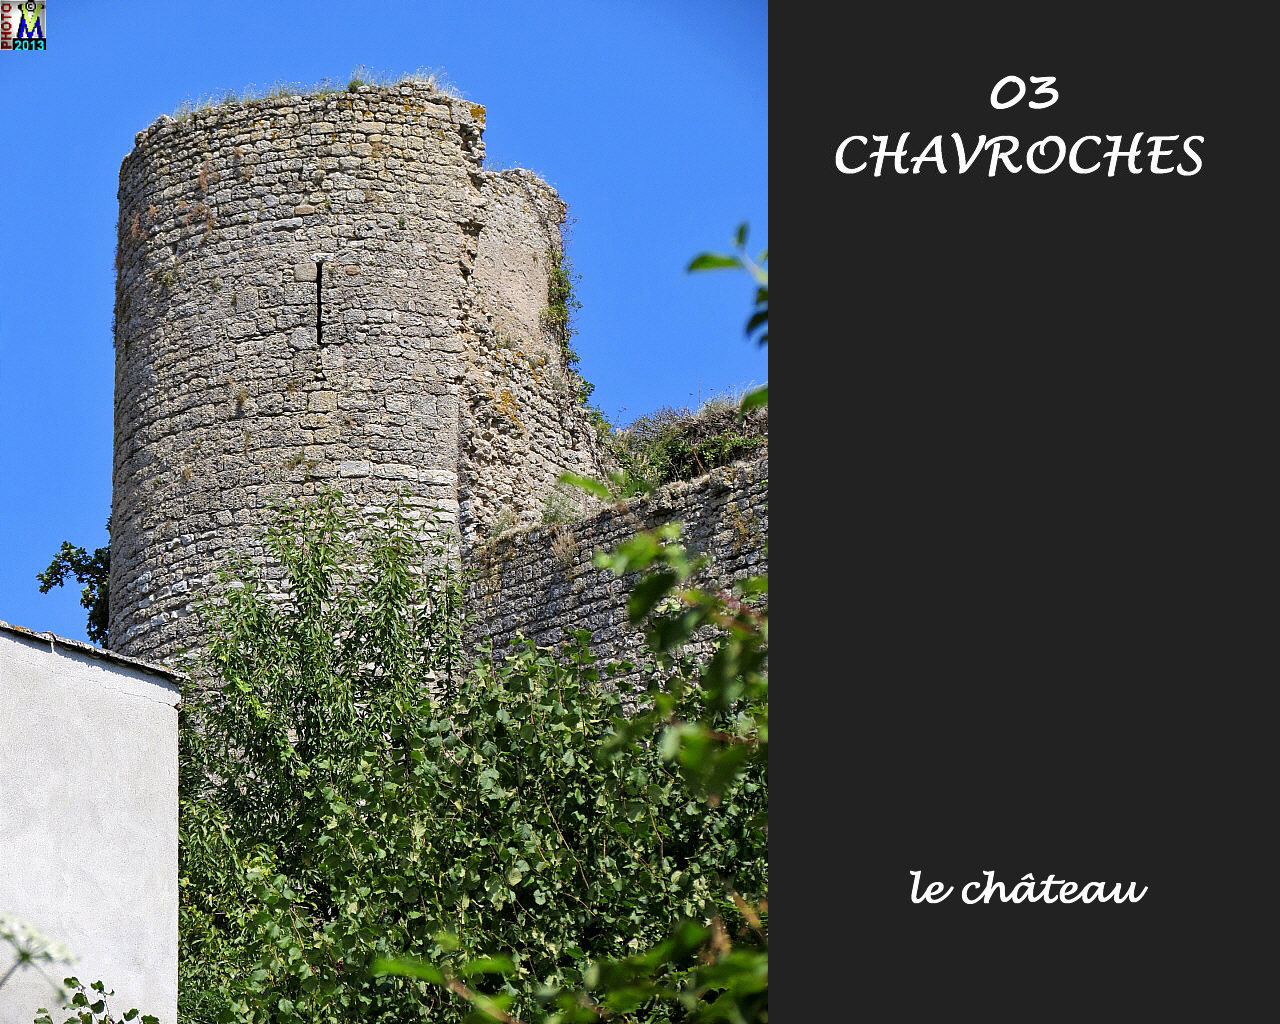 03CHAVROCHES_chateau_104.jpg